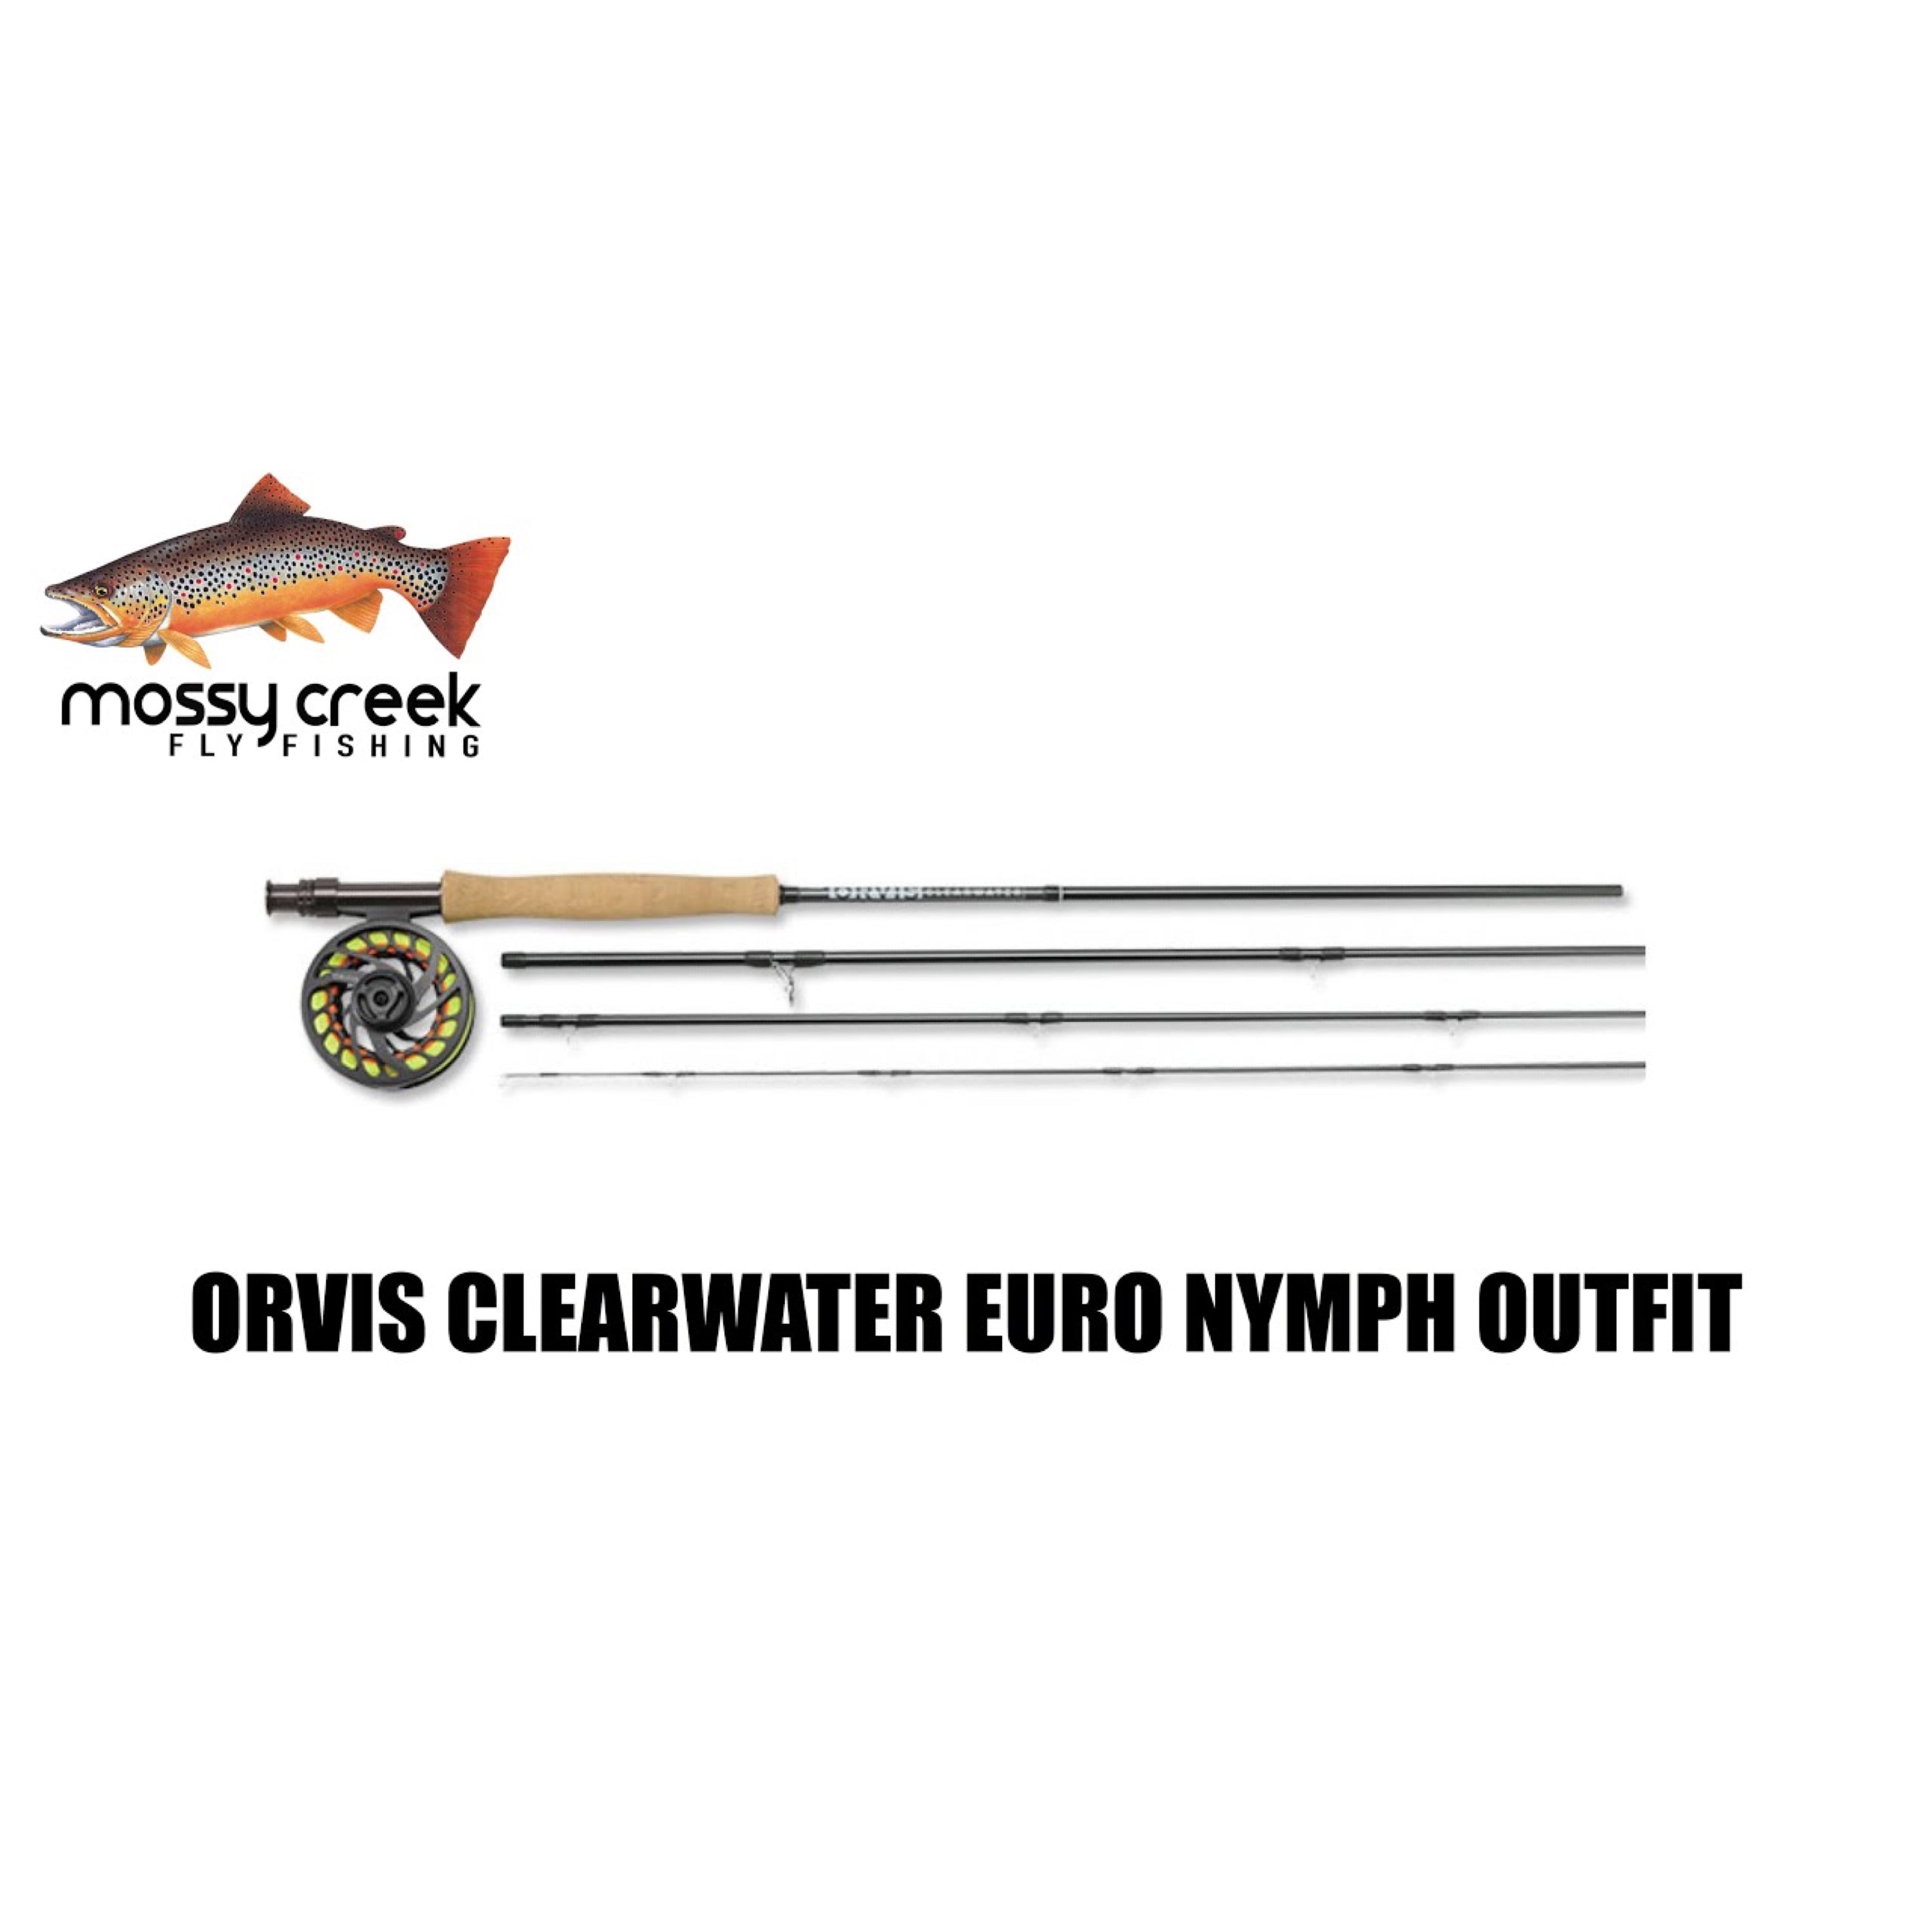 Mossy Creek Fly Fishing Product Review: Orvis Clearwater Euro